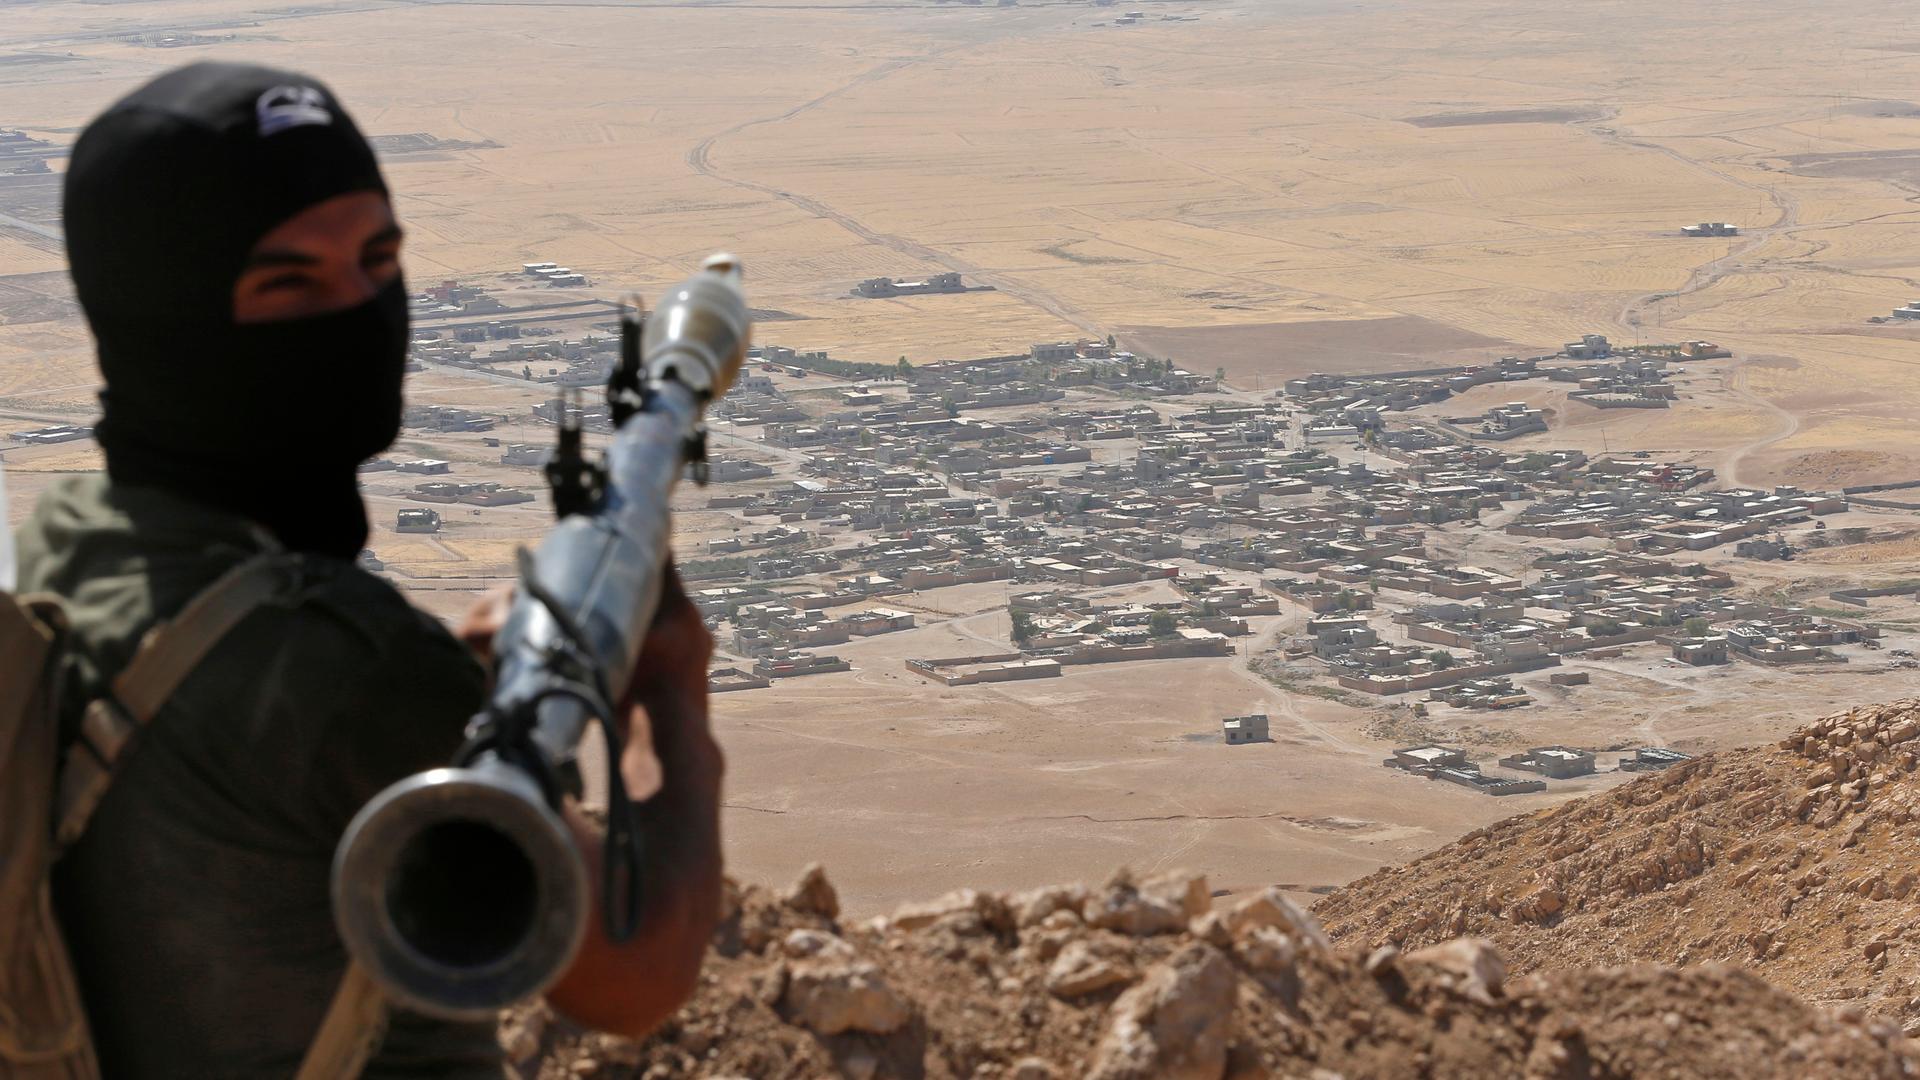 A Kurdish Peshmerga fighter looks down on Islamic State controlled territory near Mosul in 2014. Peshmerga forces this week repelled a new Islamic State offensive in the same area.